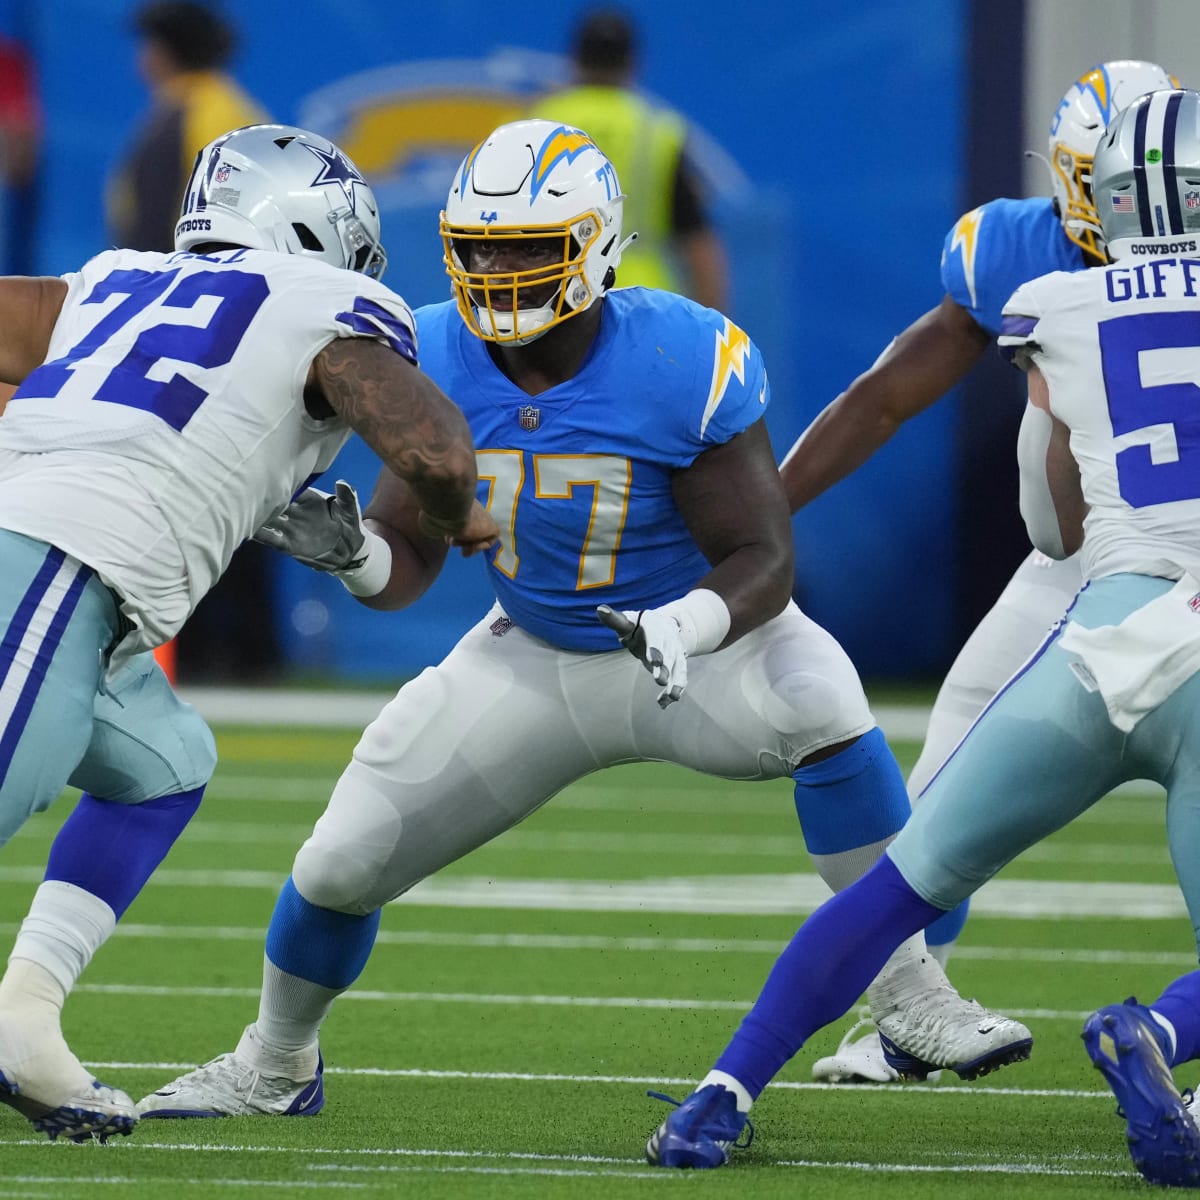 Chargers Schedule: Best matchups on the 2022 schedule - Bolts From The Blue